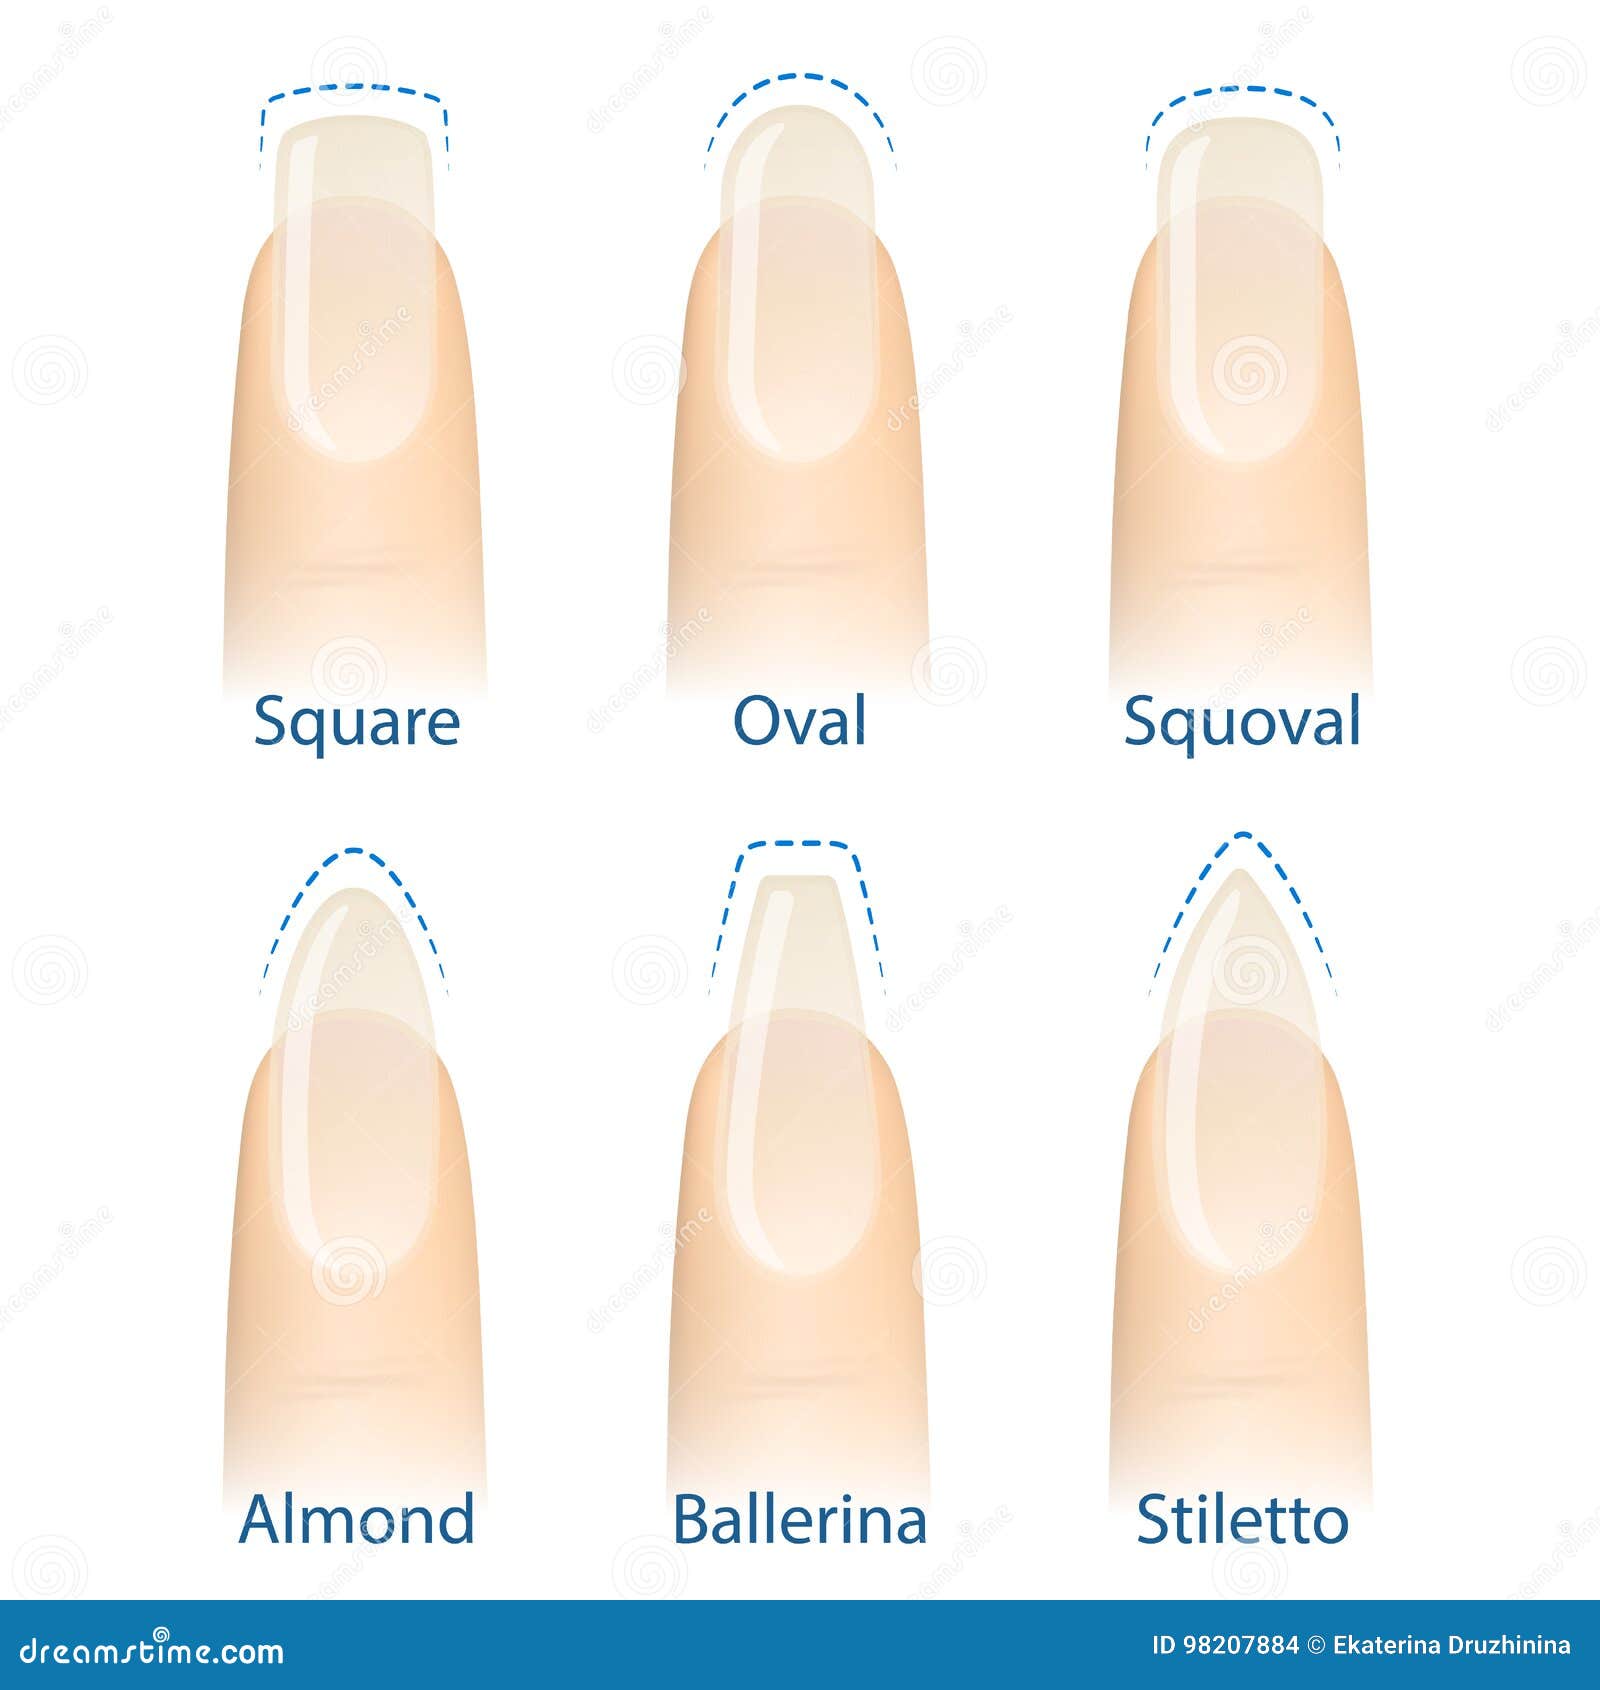 10 Different Nail Shapes for Every Finger Type | Glamour